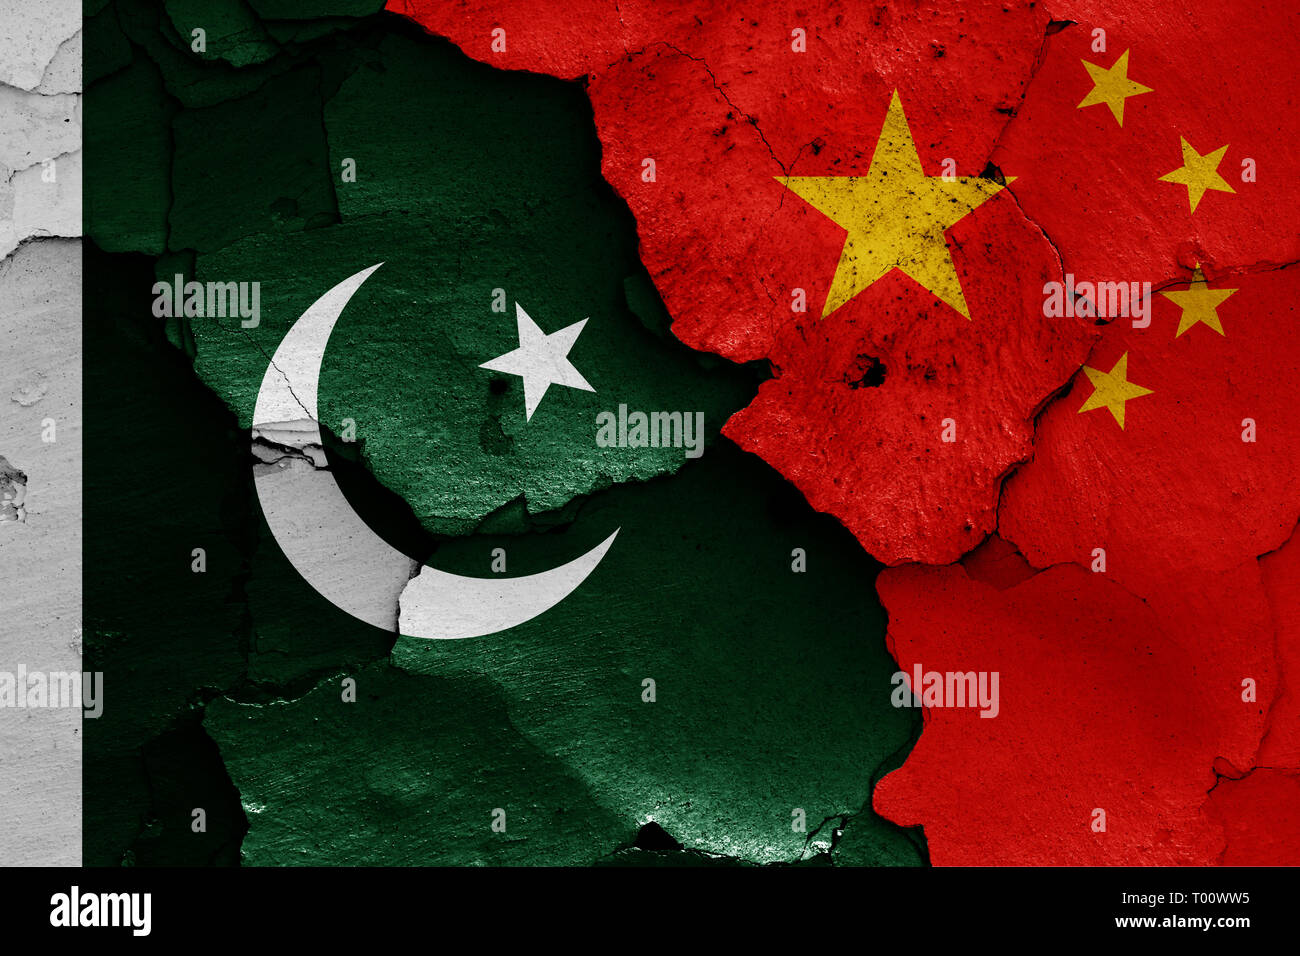 Flags Of Pakistan And China Painted On Cracked Wall Stock Photo